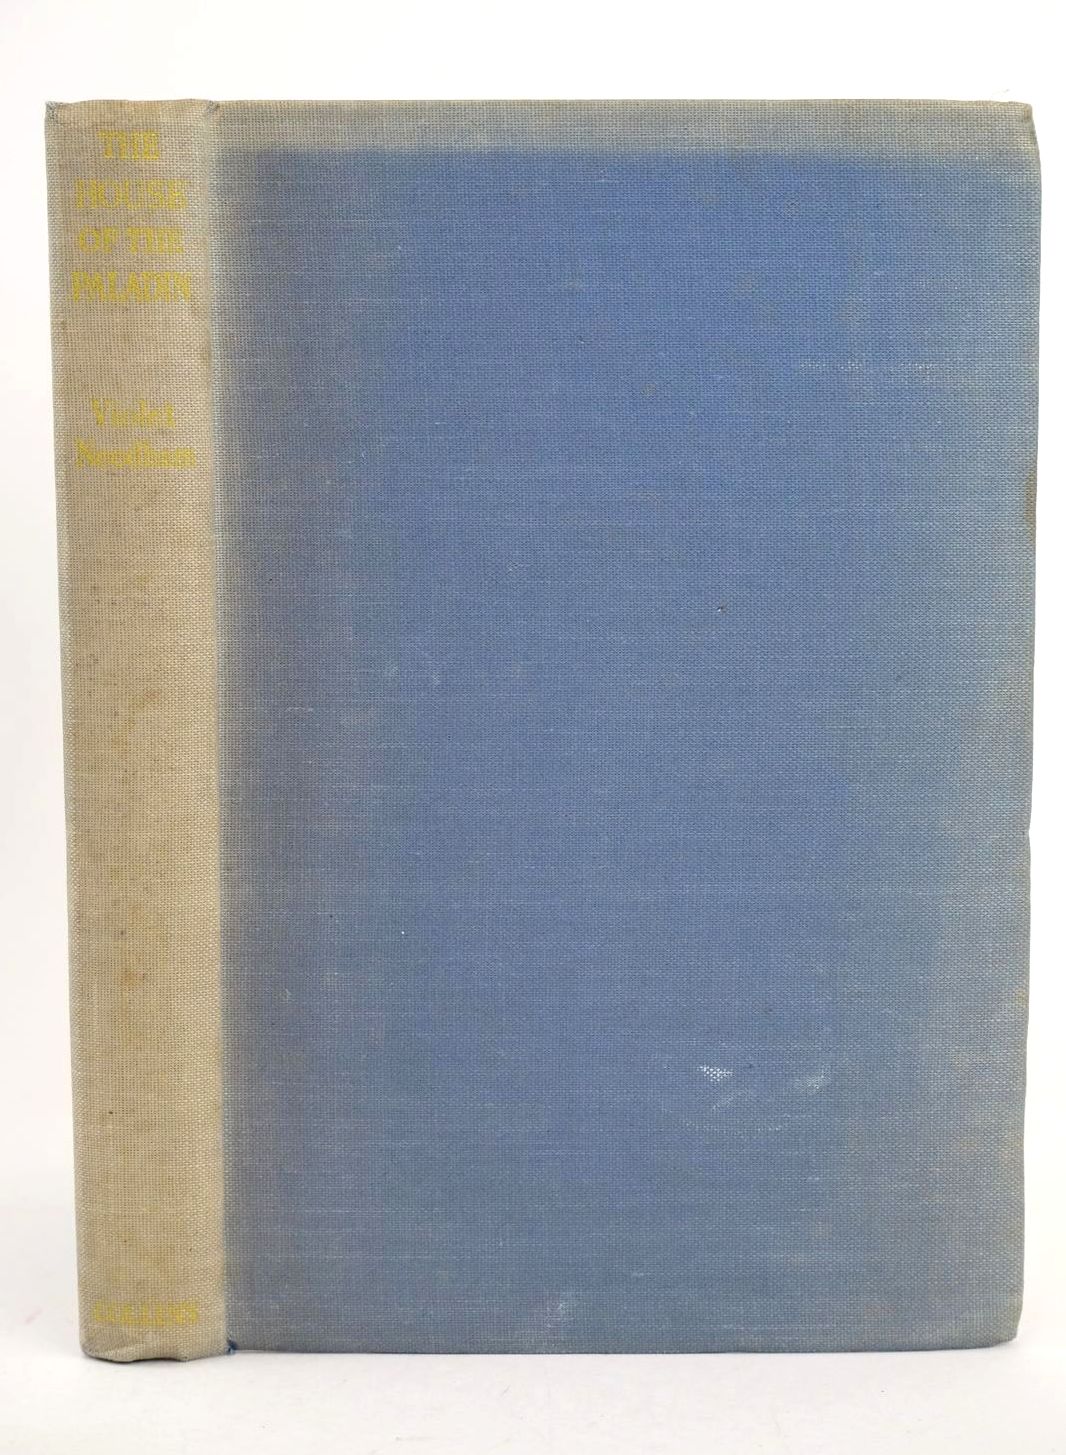 Photo of THE HOUSE OF THE PALADIN written by Needham, Violet illustrated by Bruce, Joyce published by Collins (STOCK CODE: 1318712)  for sale by Stella & Rose's Books